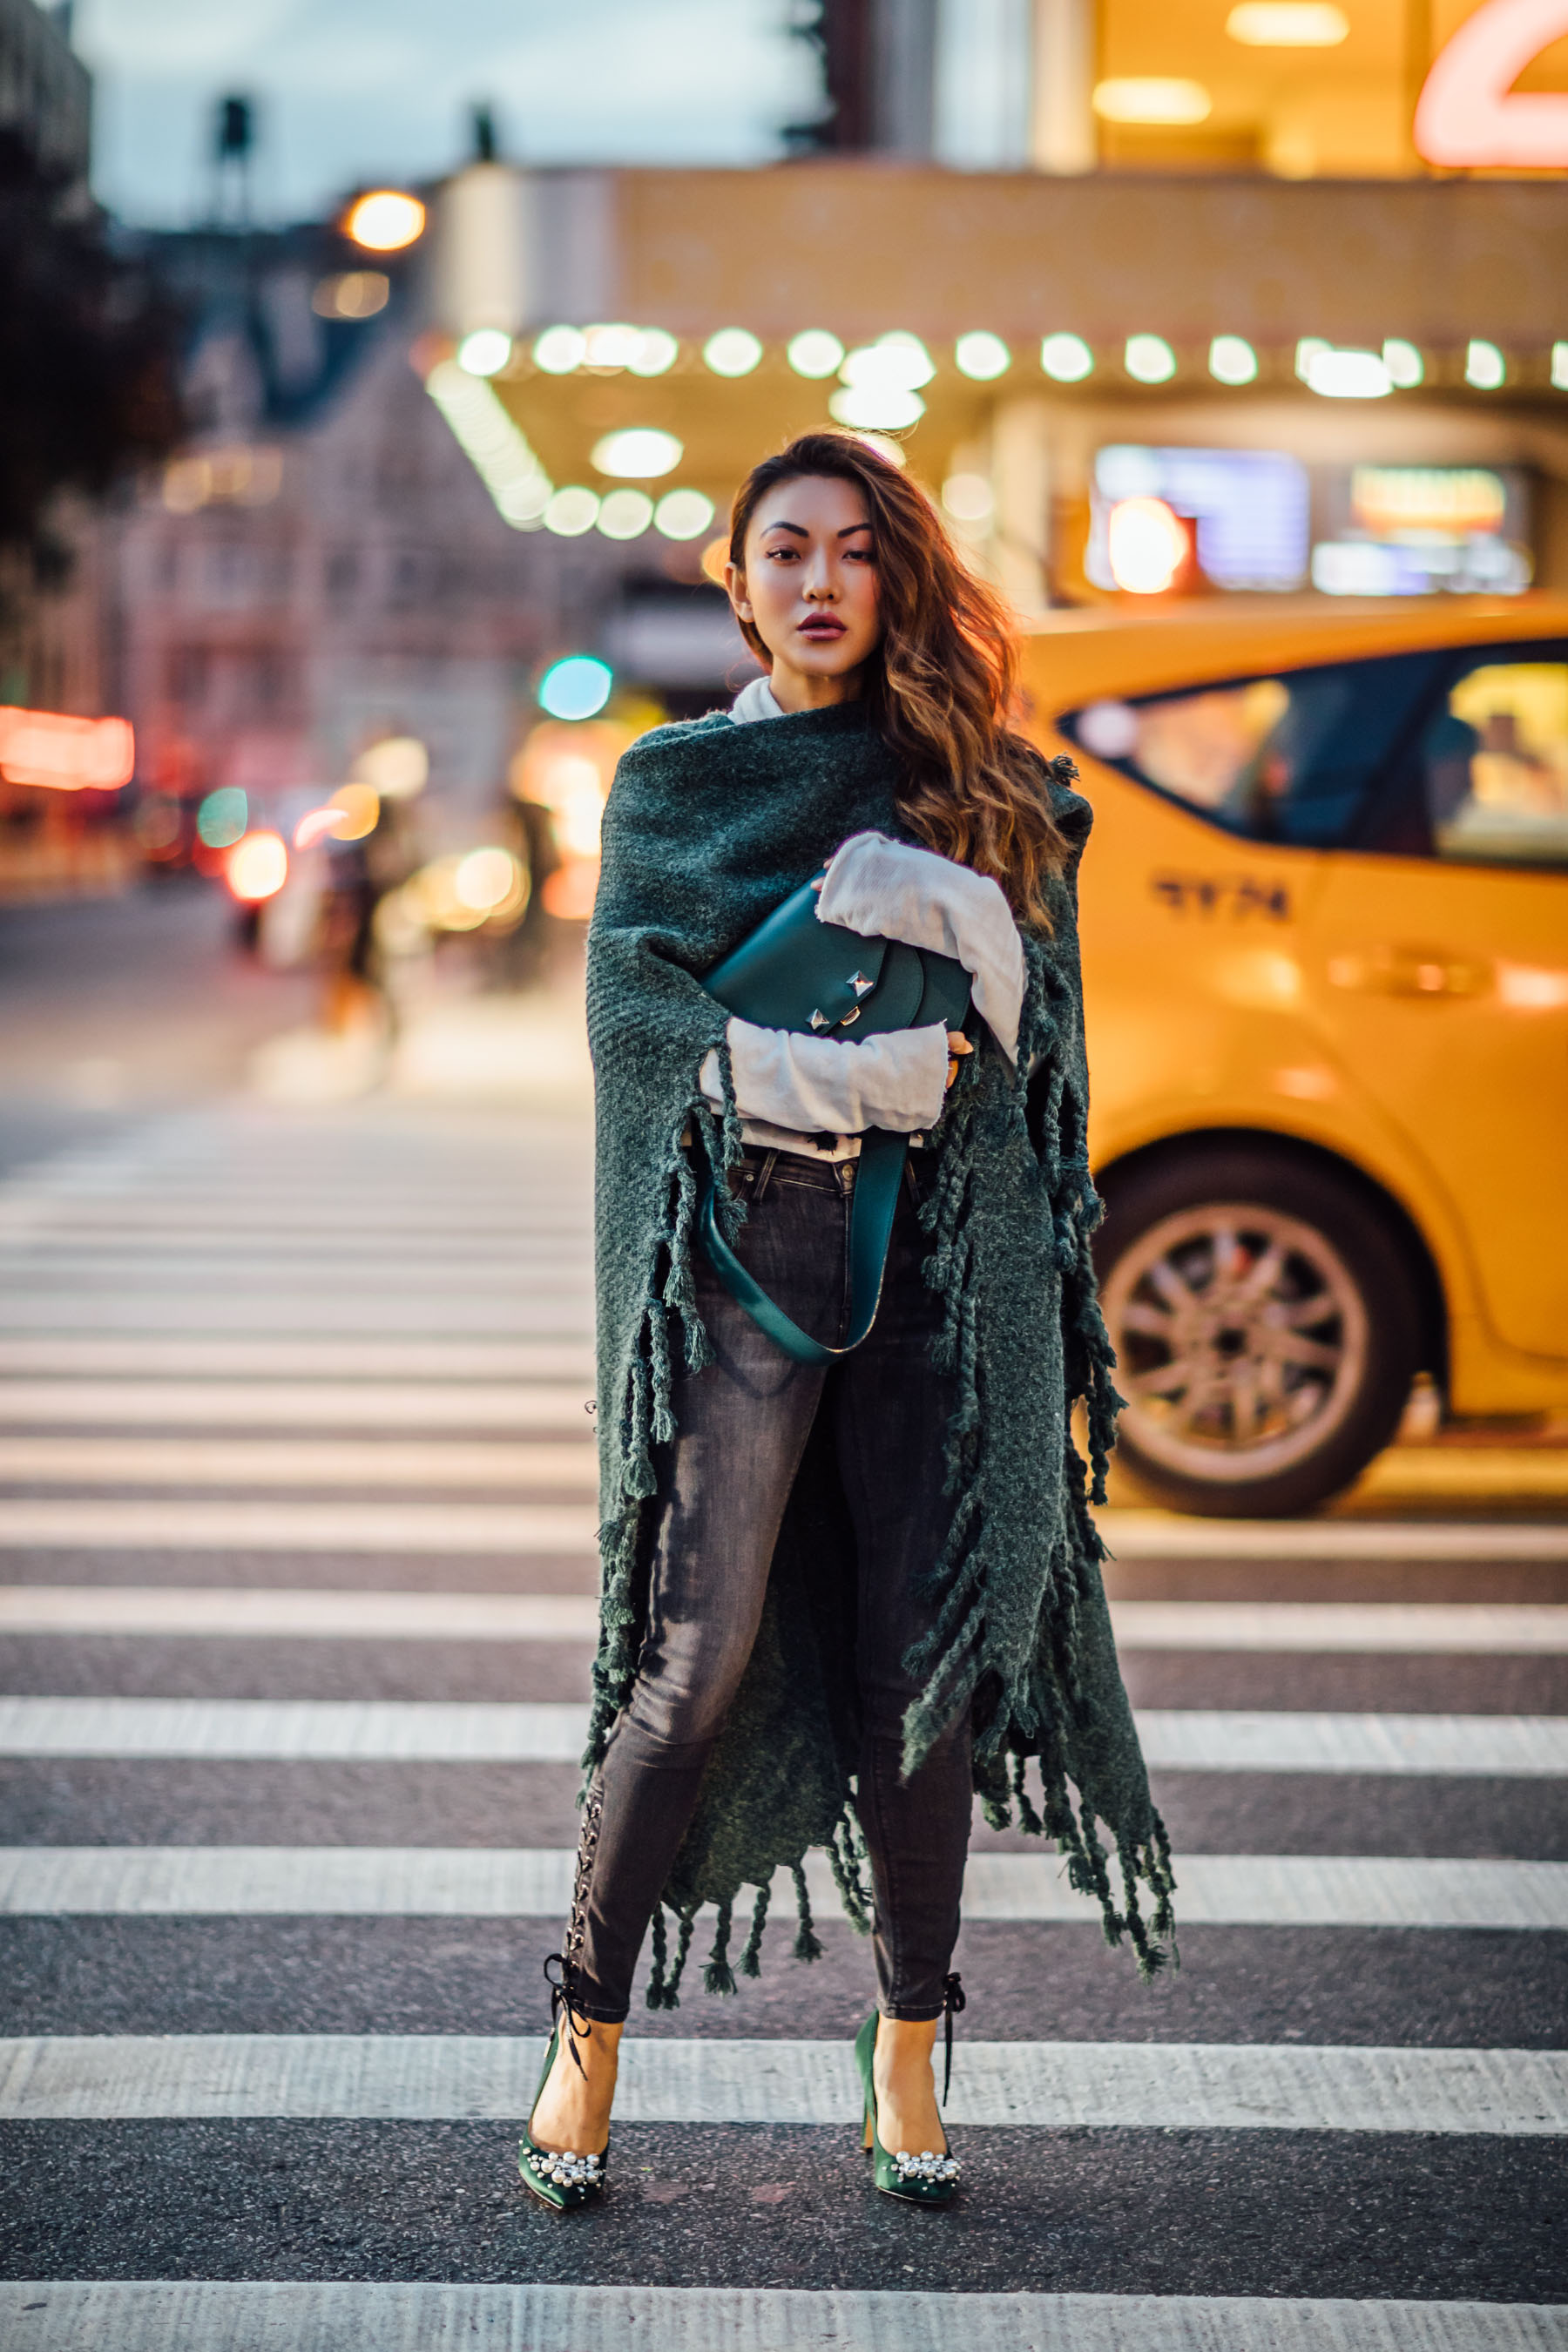 Fashion Details to Elevate Your Favorite Basics - Fringe Kimono, Lace up jeans, embellished pumps // Notjessfashion // Jessica wang, winter outfits, stylish winter outfit, fashion blogger, street style, winter street style, green satin pumps, nine west heels, fringe details, asian blogger, salar bag, green outfits